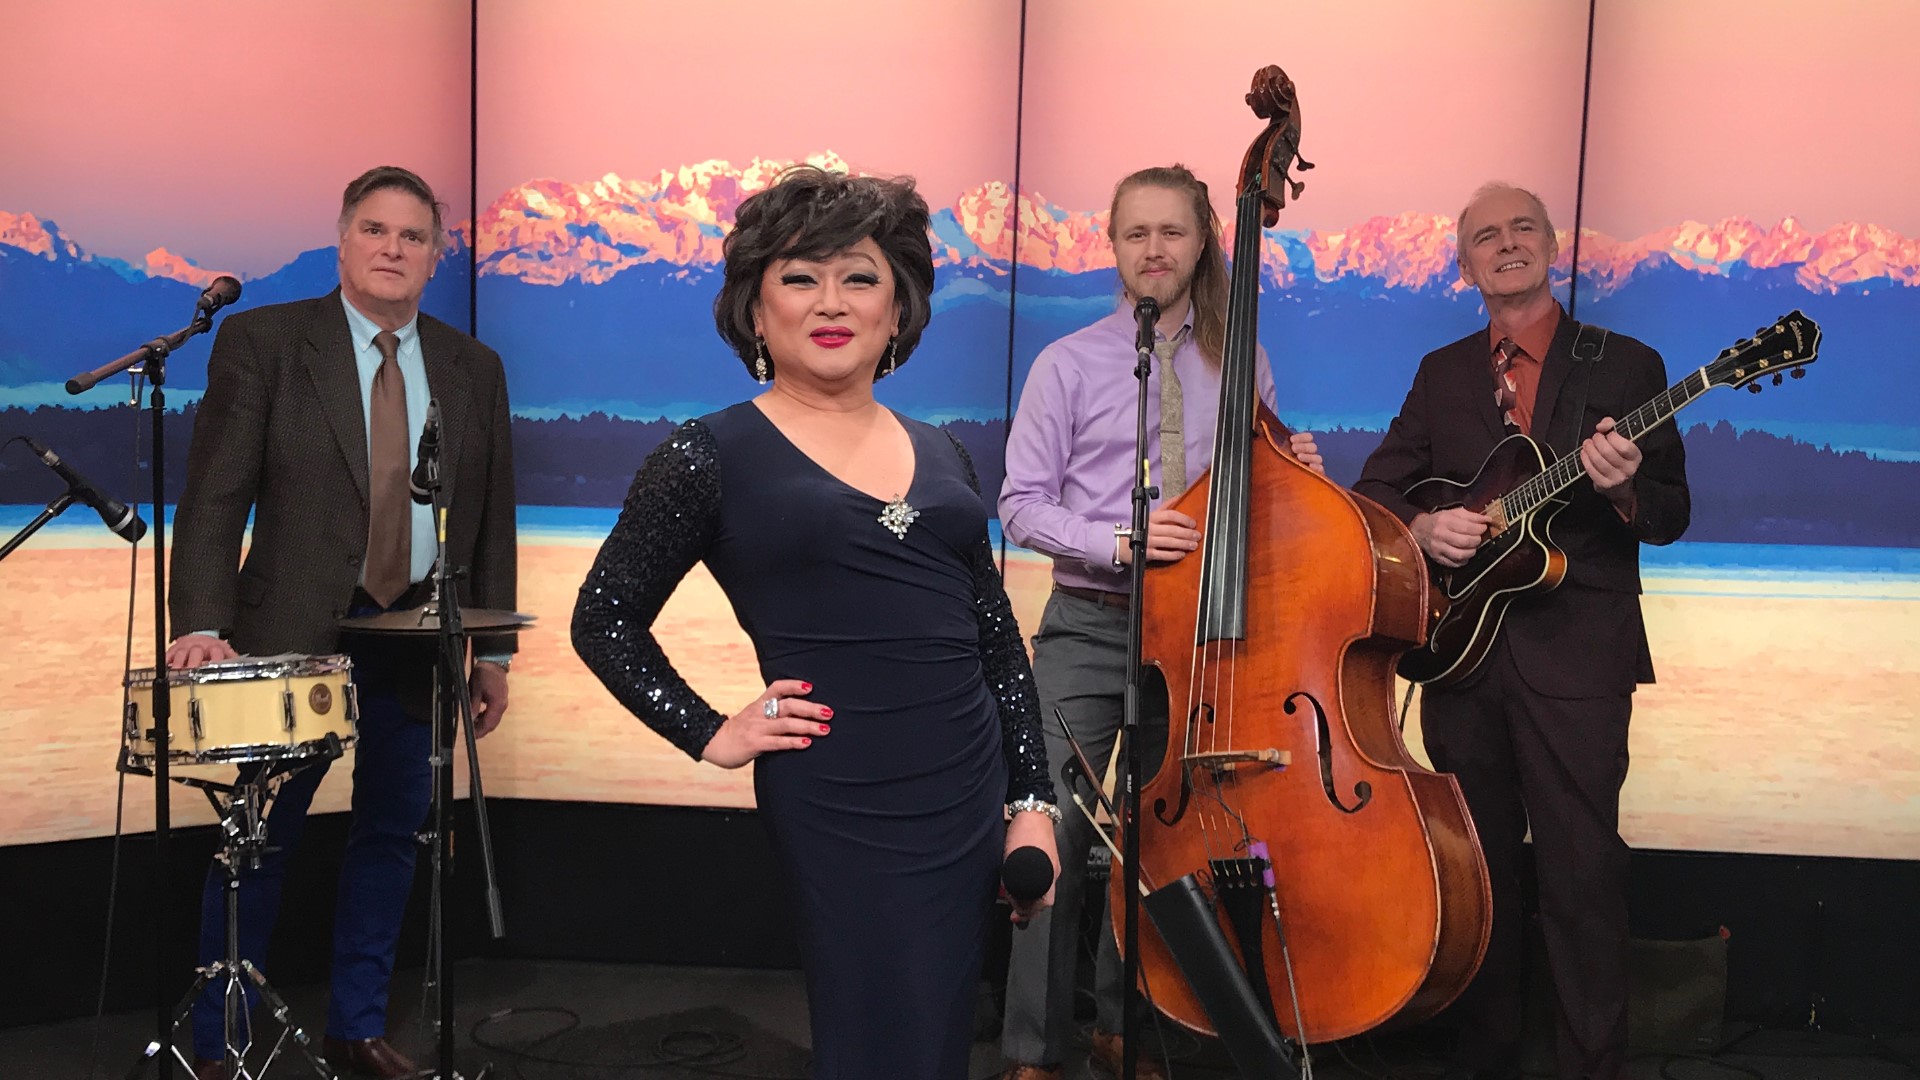 Artist Arnaldo! Dragchanteuse and the Sweet Spot Combo perform "You Make Me Feel So Young" live in-studio. The Cabaret Festival is Mar 5-28 at Egan's Ballard.